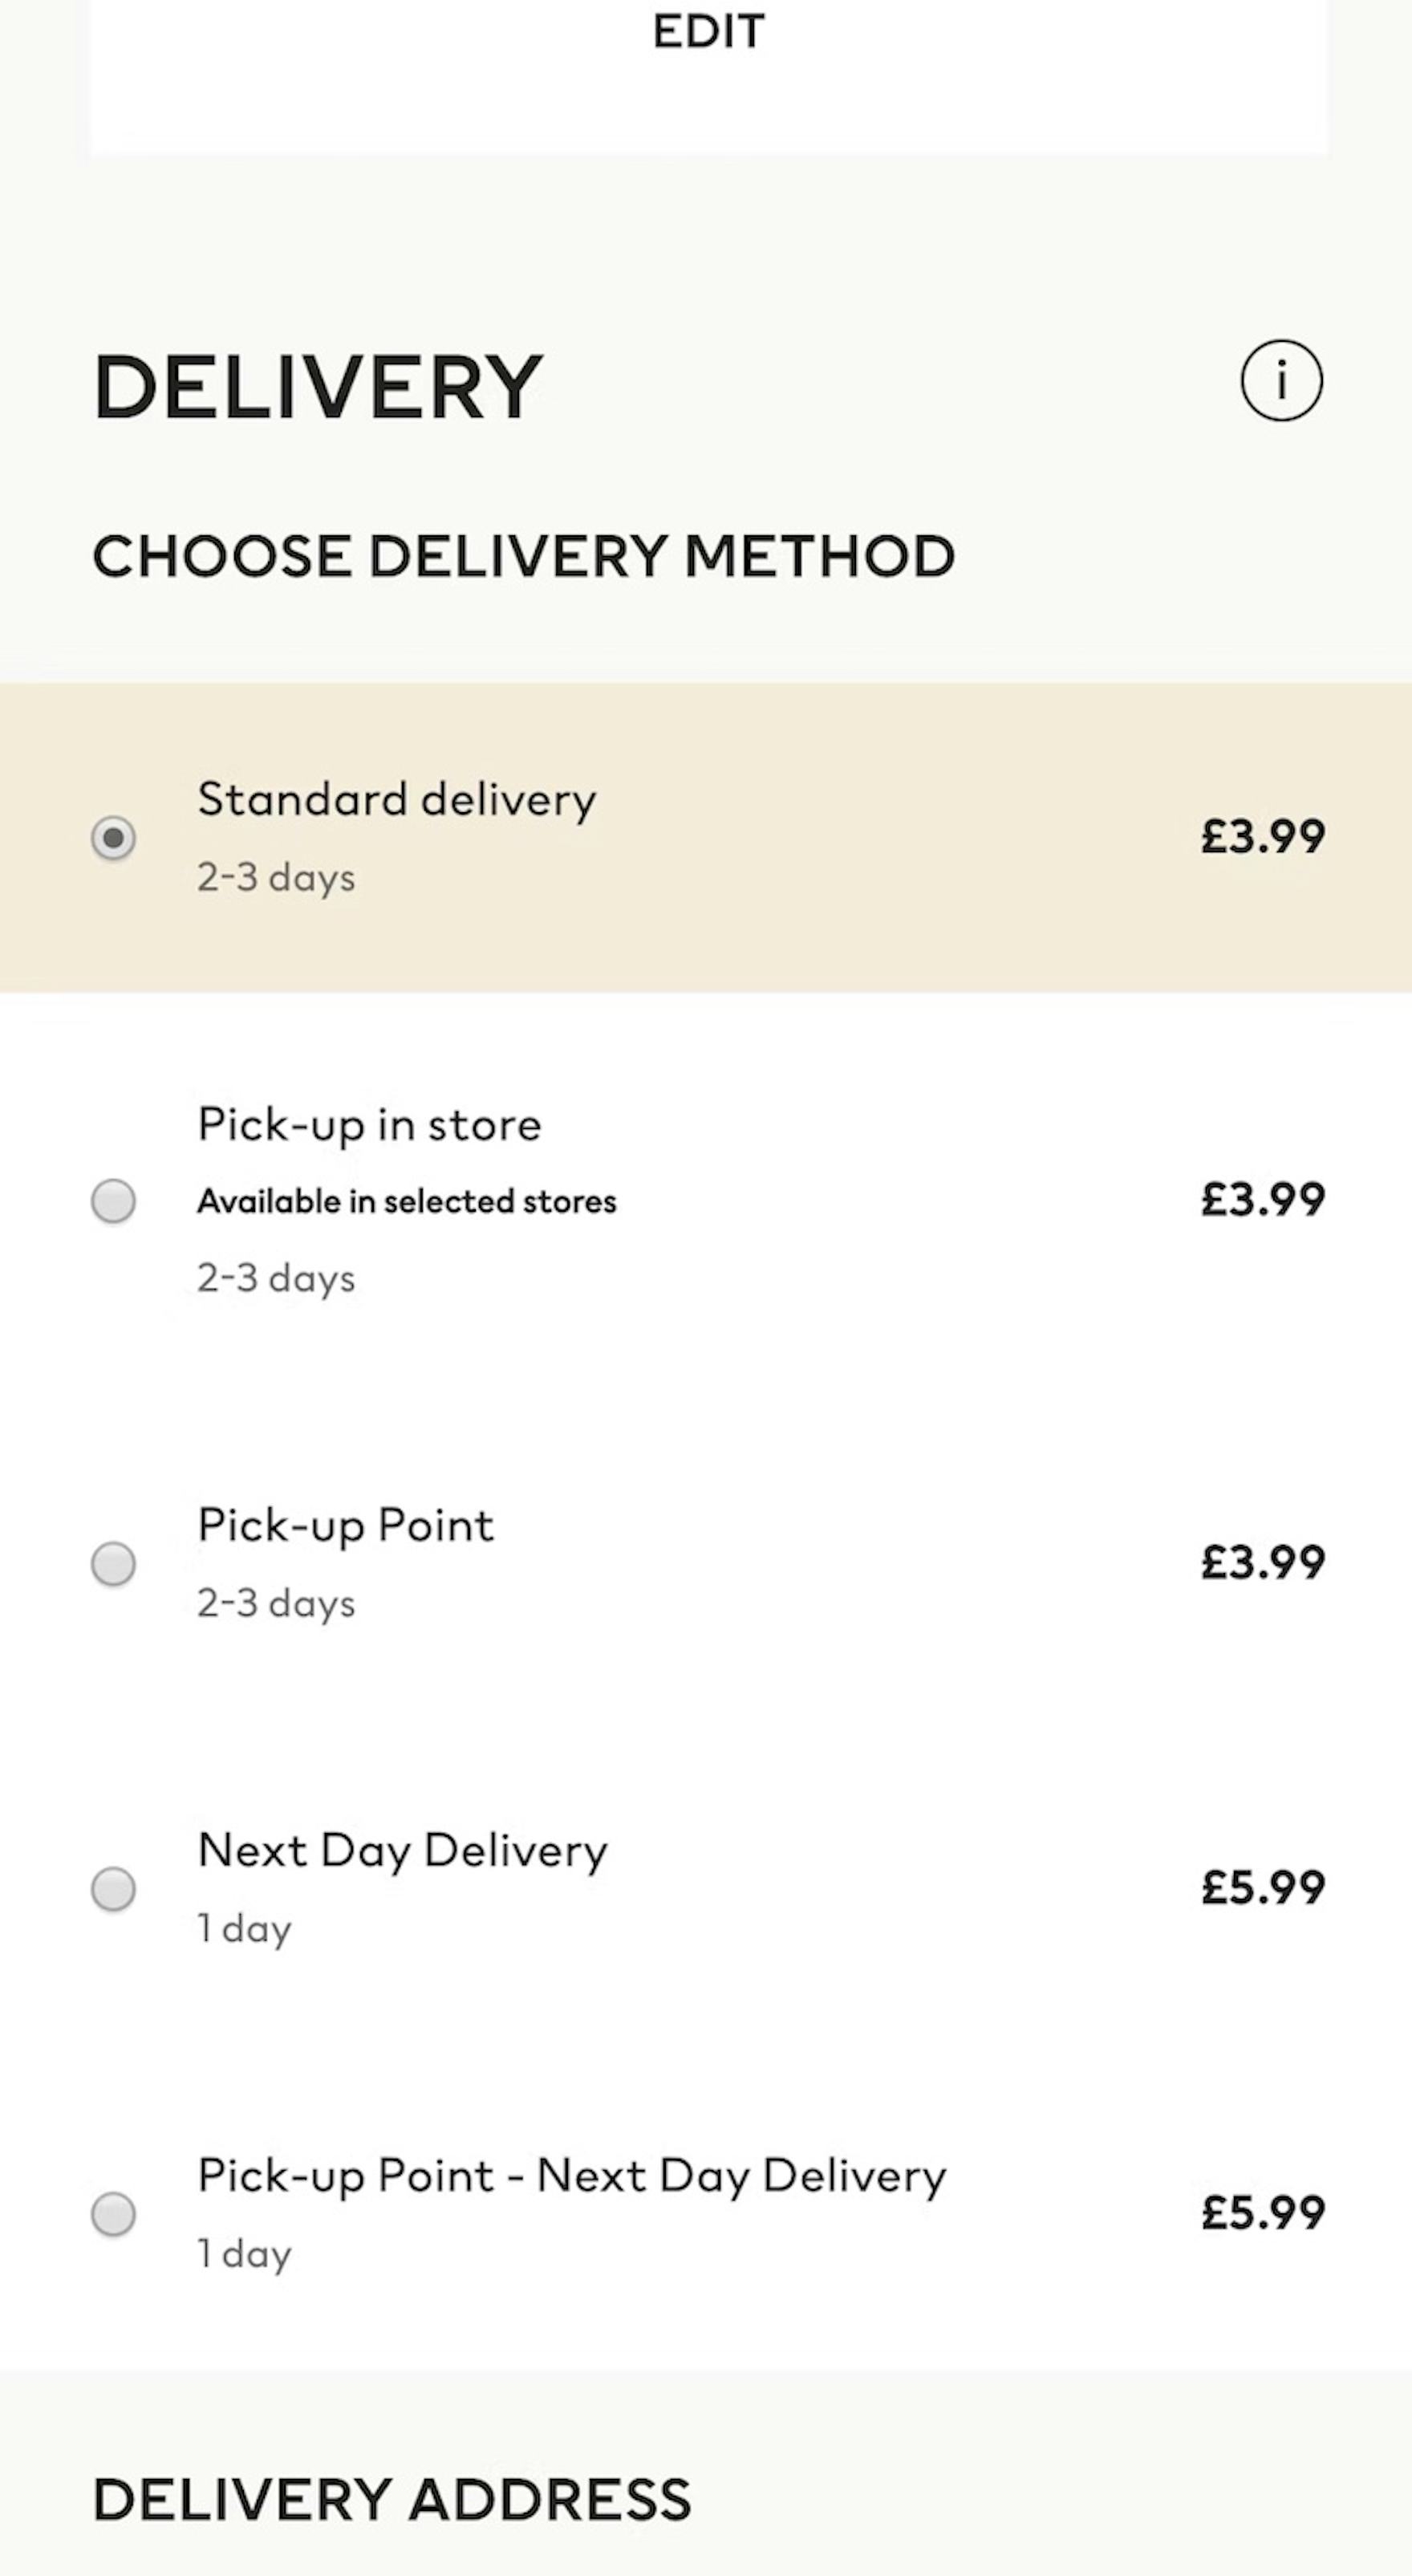 Use “Delivery Date” Not “Shipping Speed” (41% Don't) — From UX